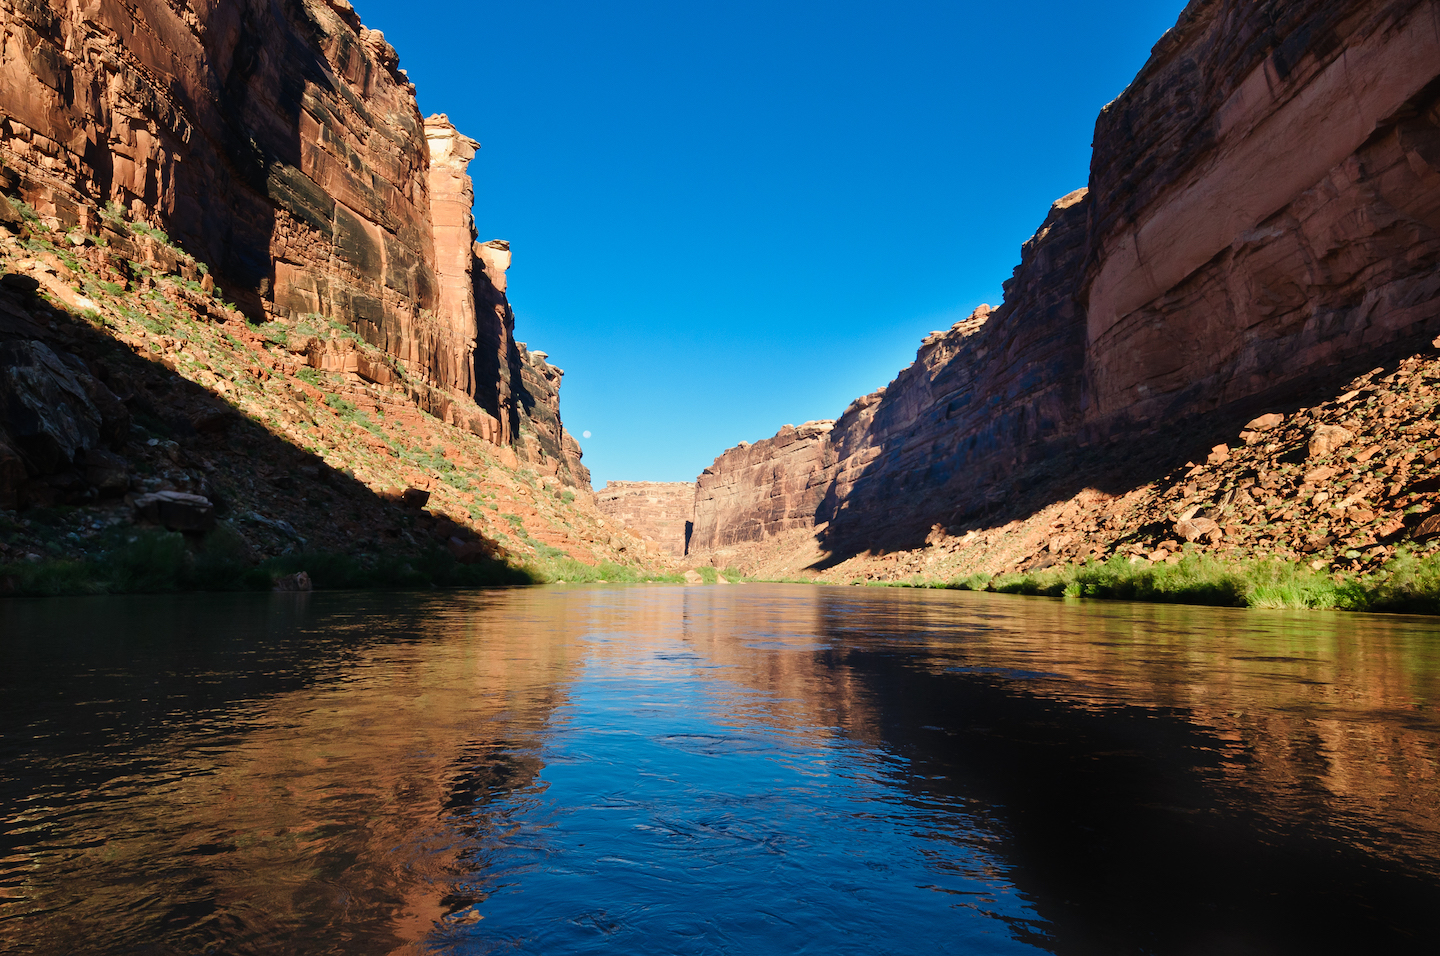 April 2020 Photo of the Month:  Last Day in the Canyon - Ben Nieves